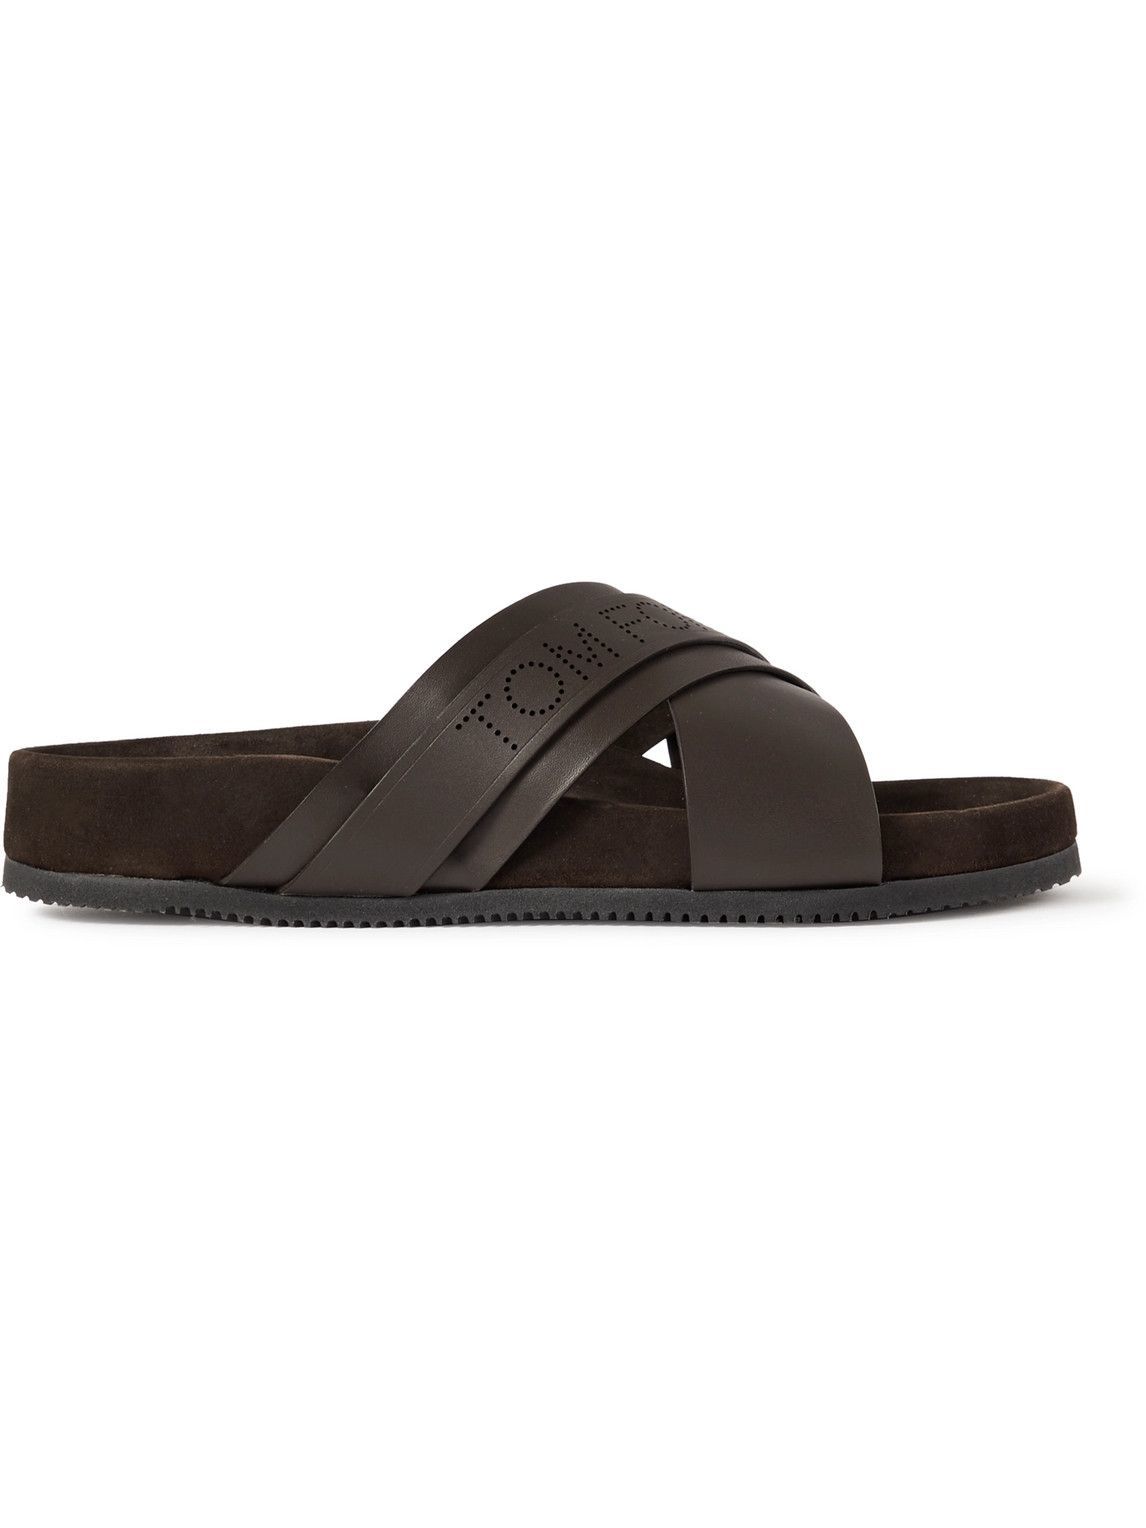 Photo: TOM FORD - Wicklow Perforated Leather Slides - Brown